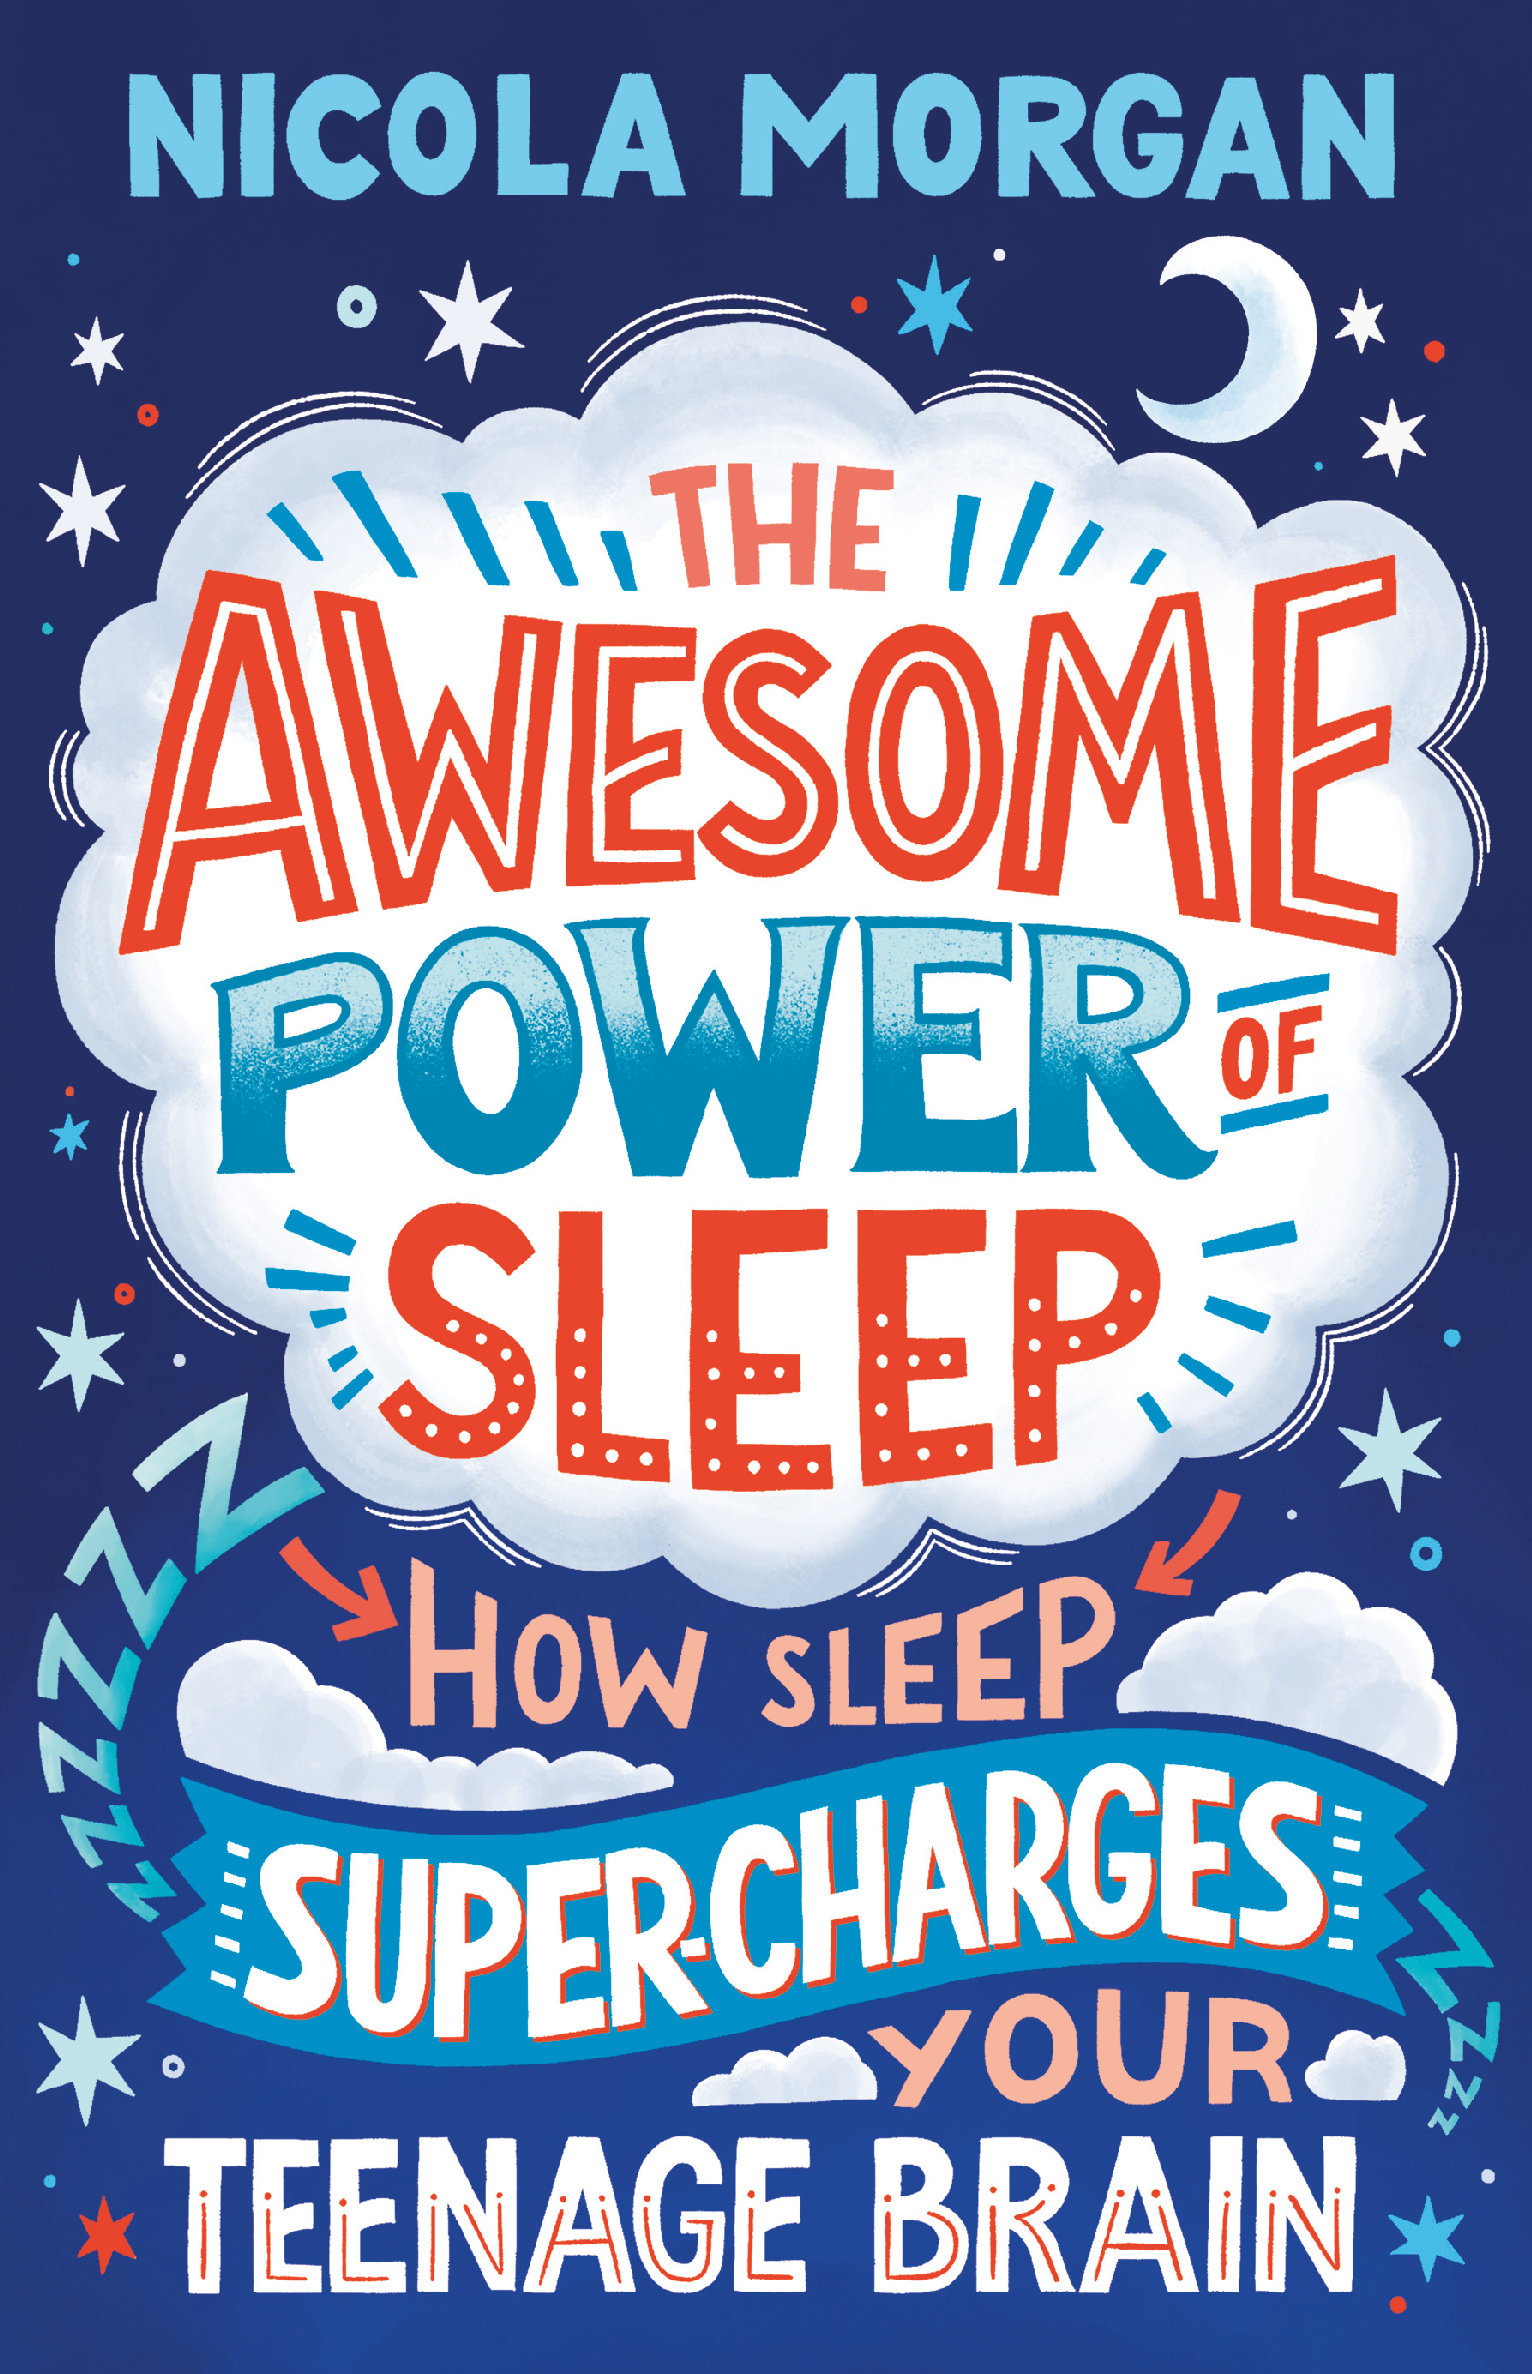 The-Awesome-Power-of-Sleep